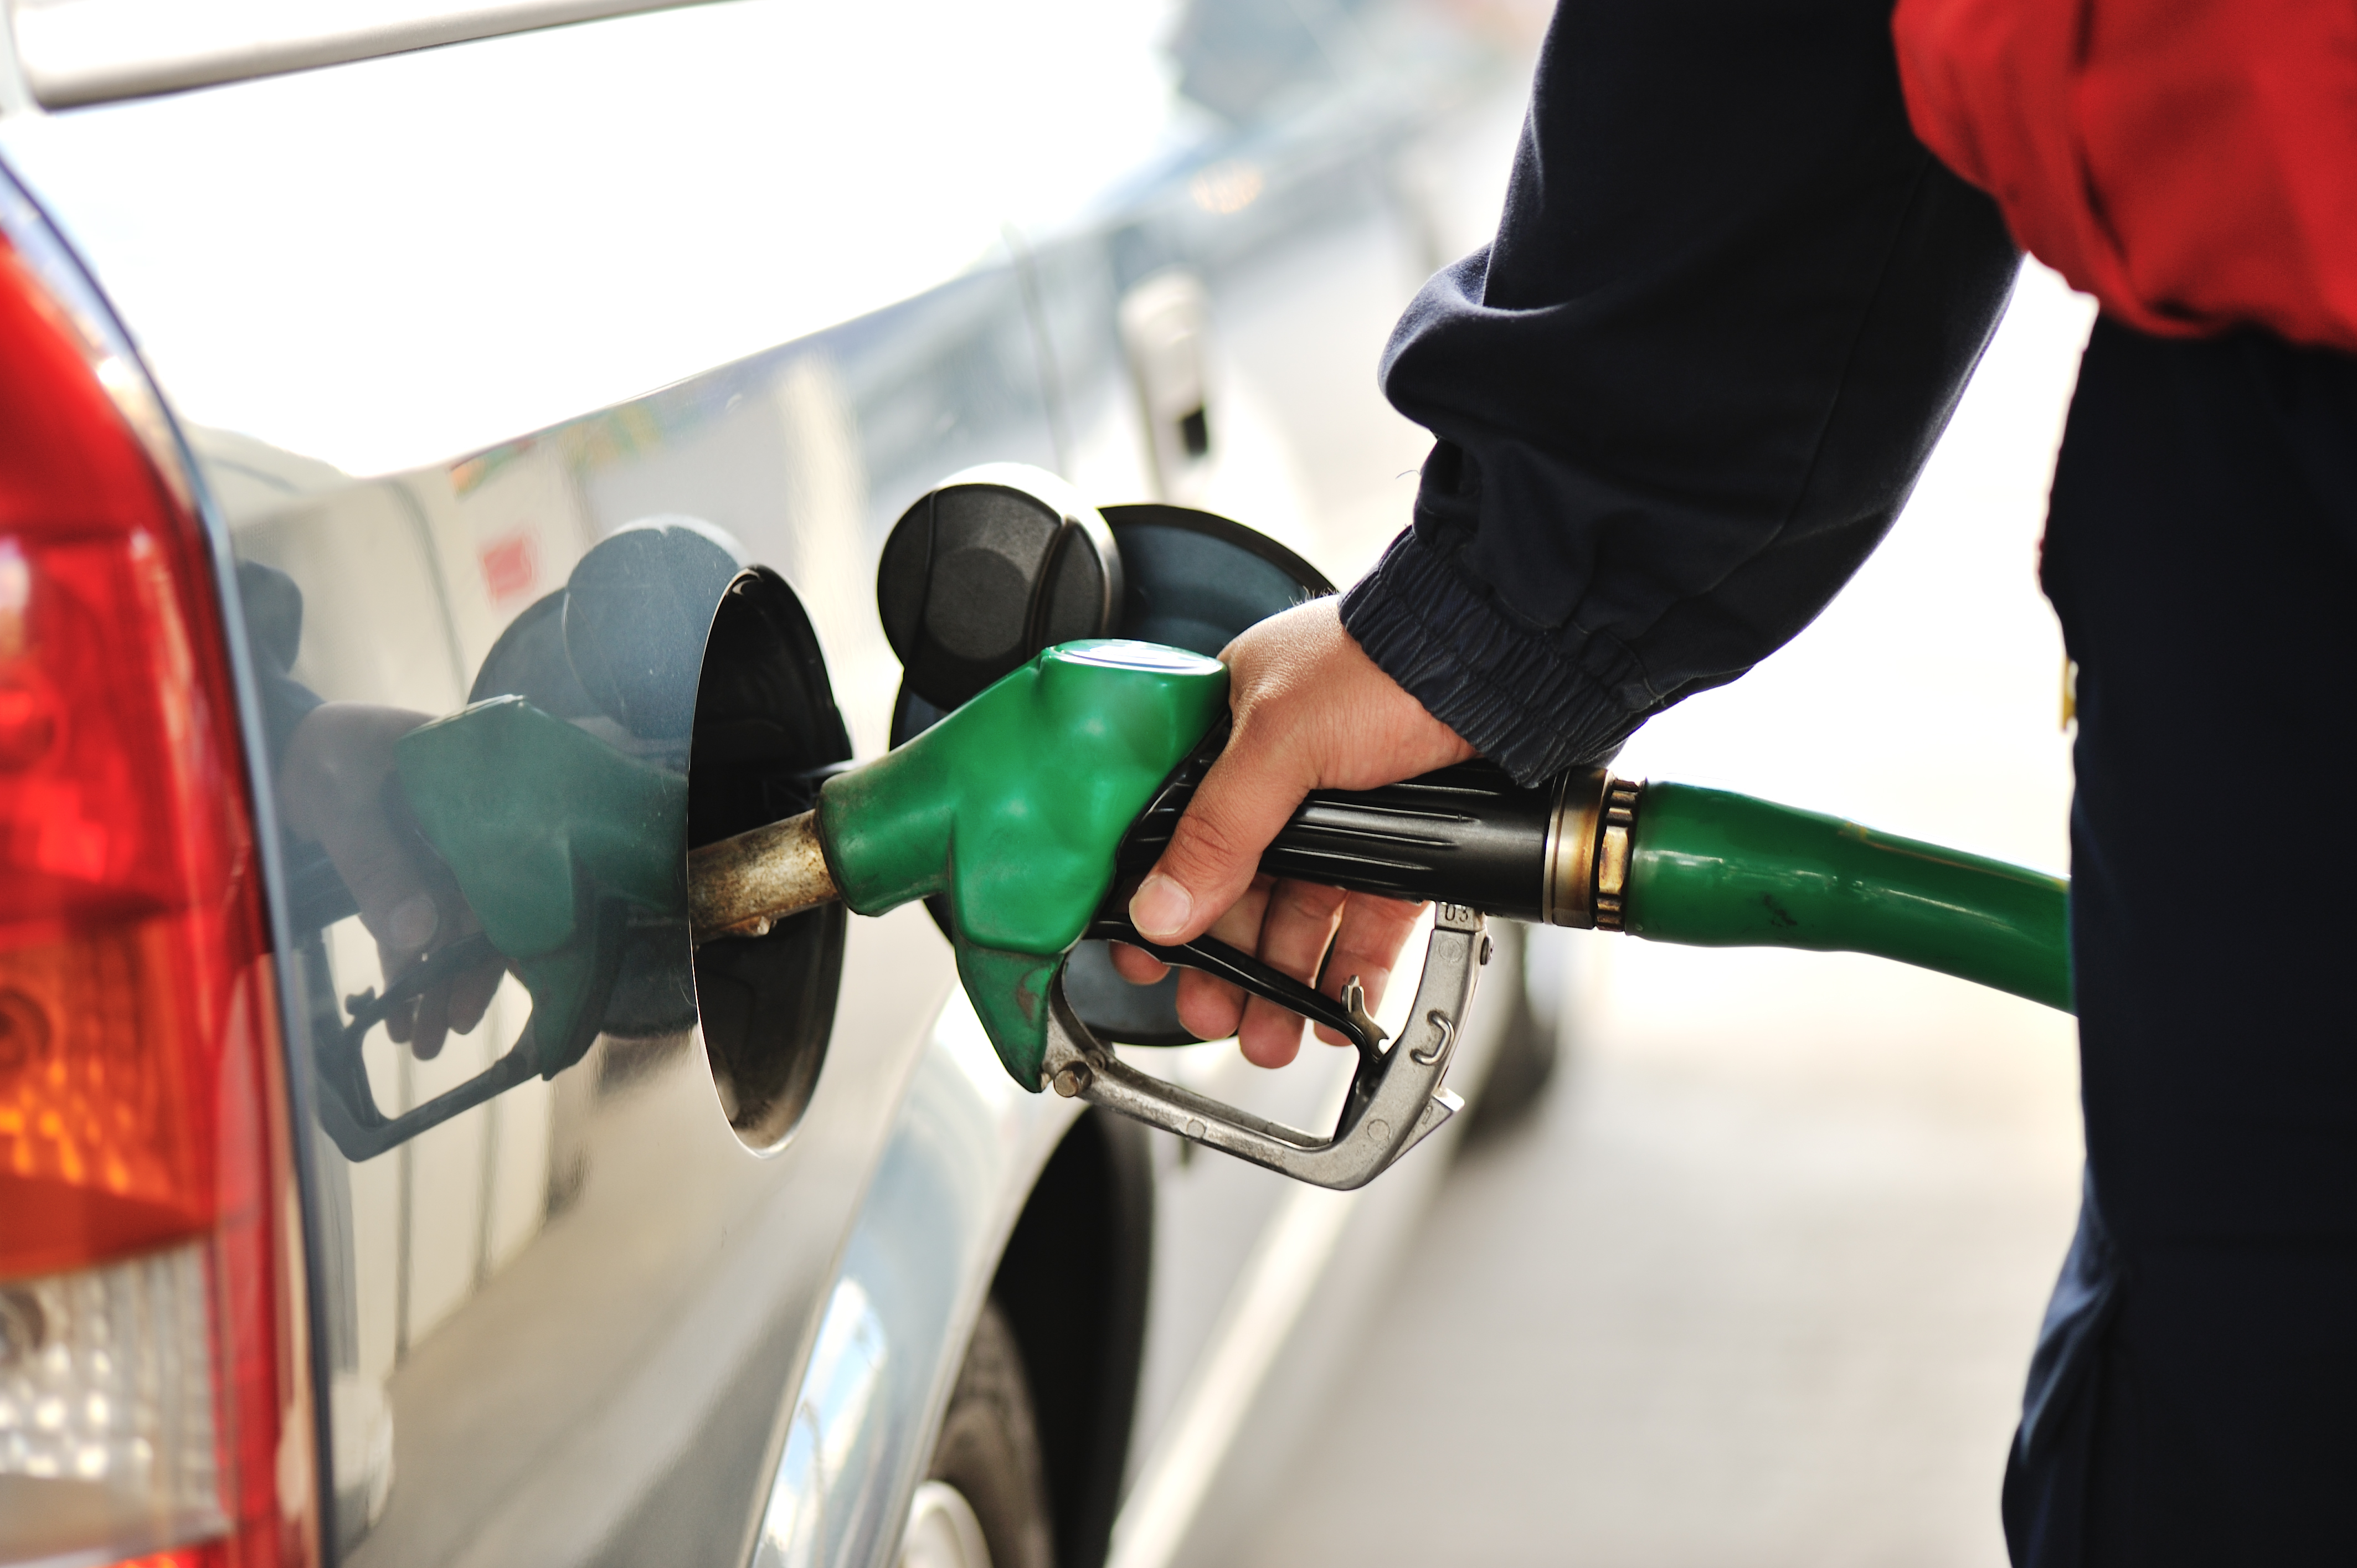 Soaring Gas Prices Affecting Commuters, Ride-Share Drivers & Truckers